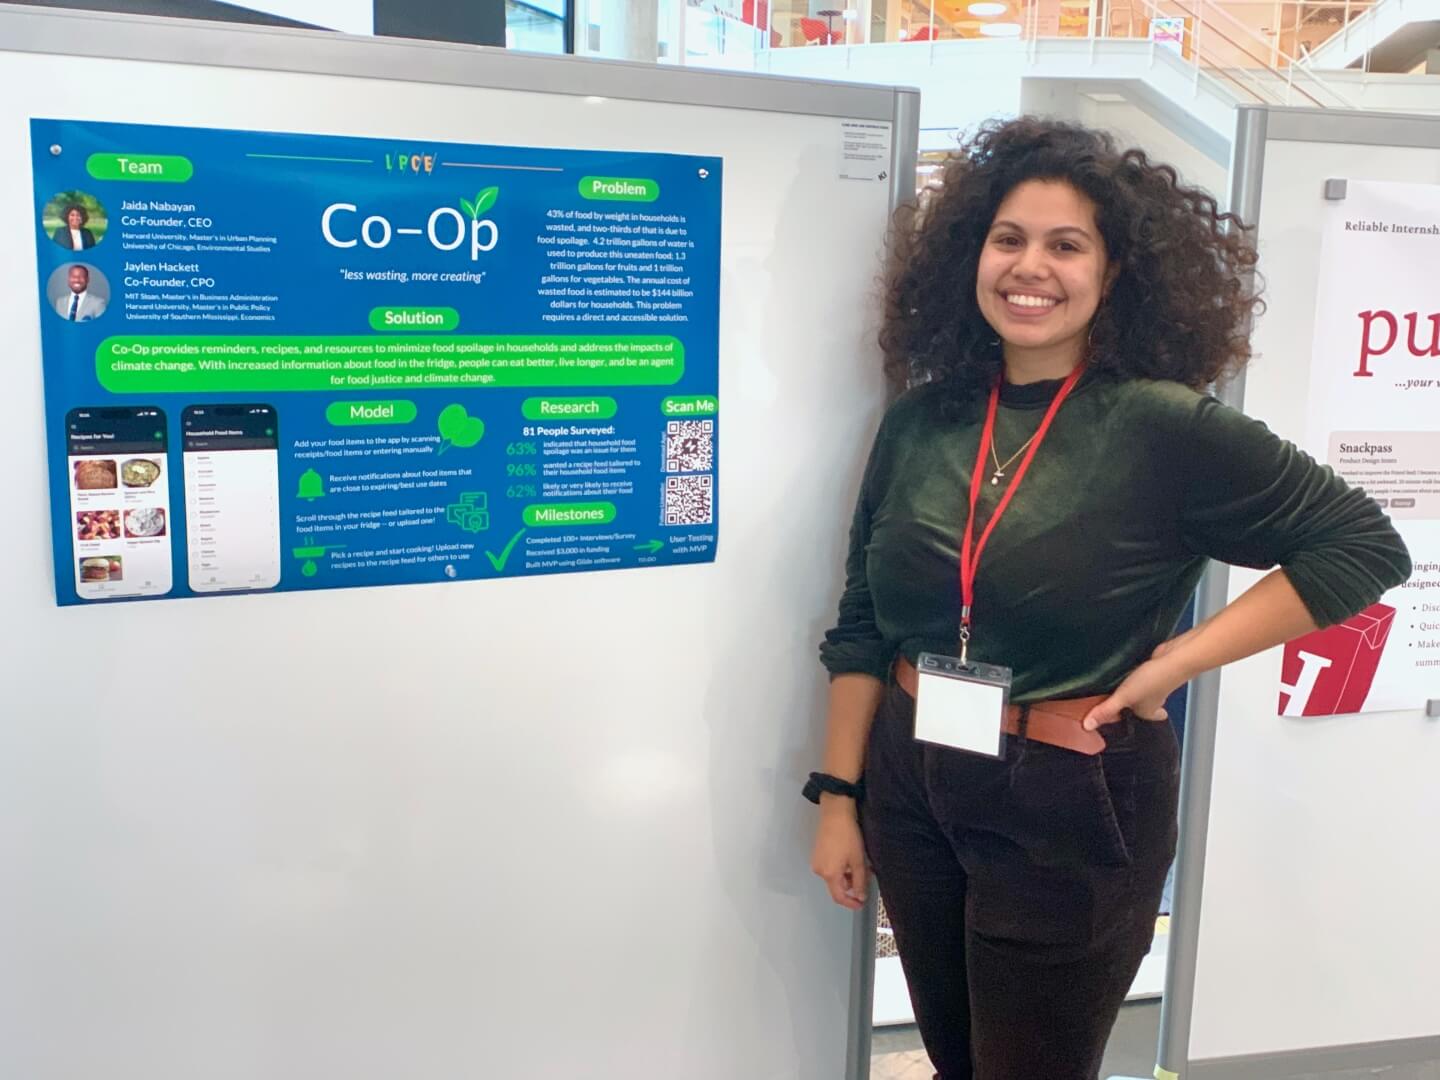 Jaida Nabayan with a poster for the start-up "Co-Op"